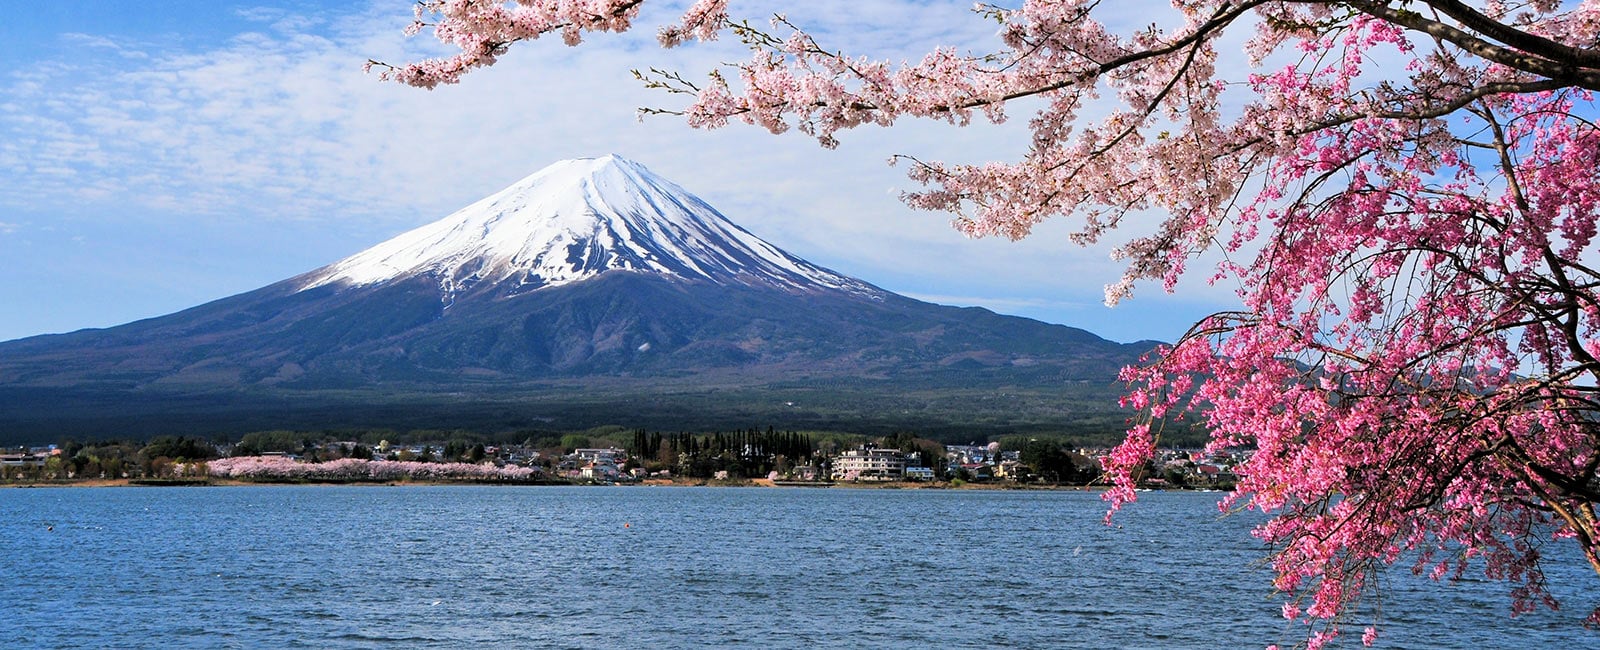 Enjoy a vacation in Japan with Hilton Grand Vacations